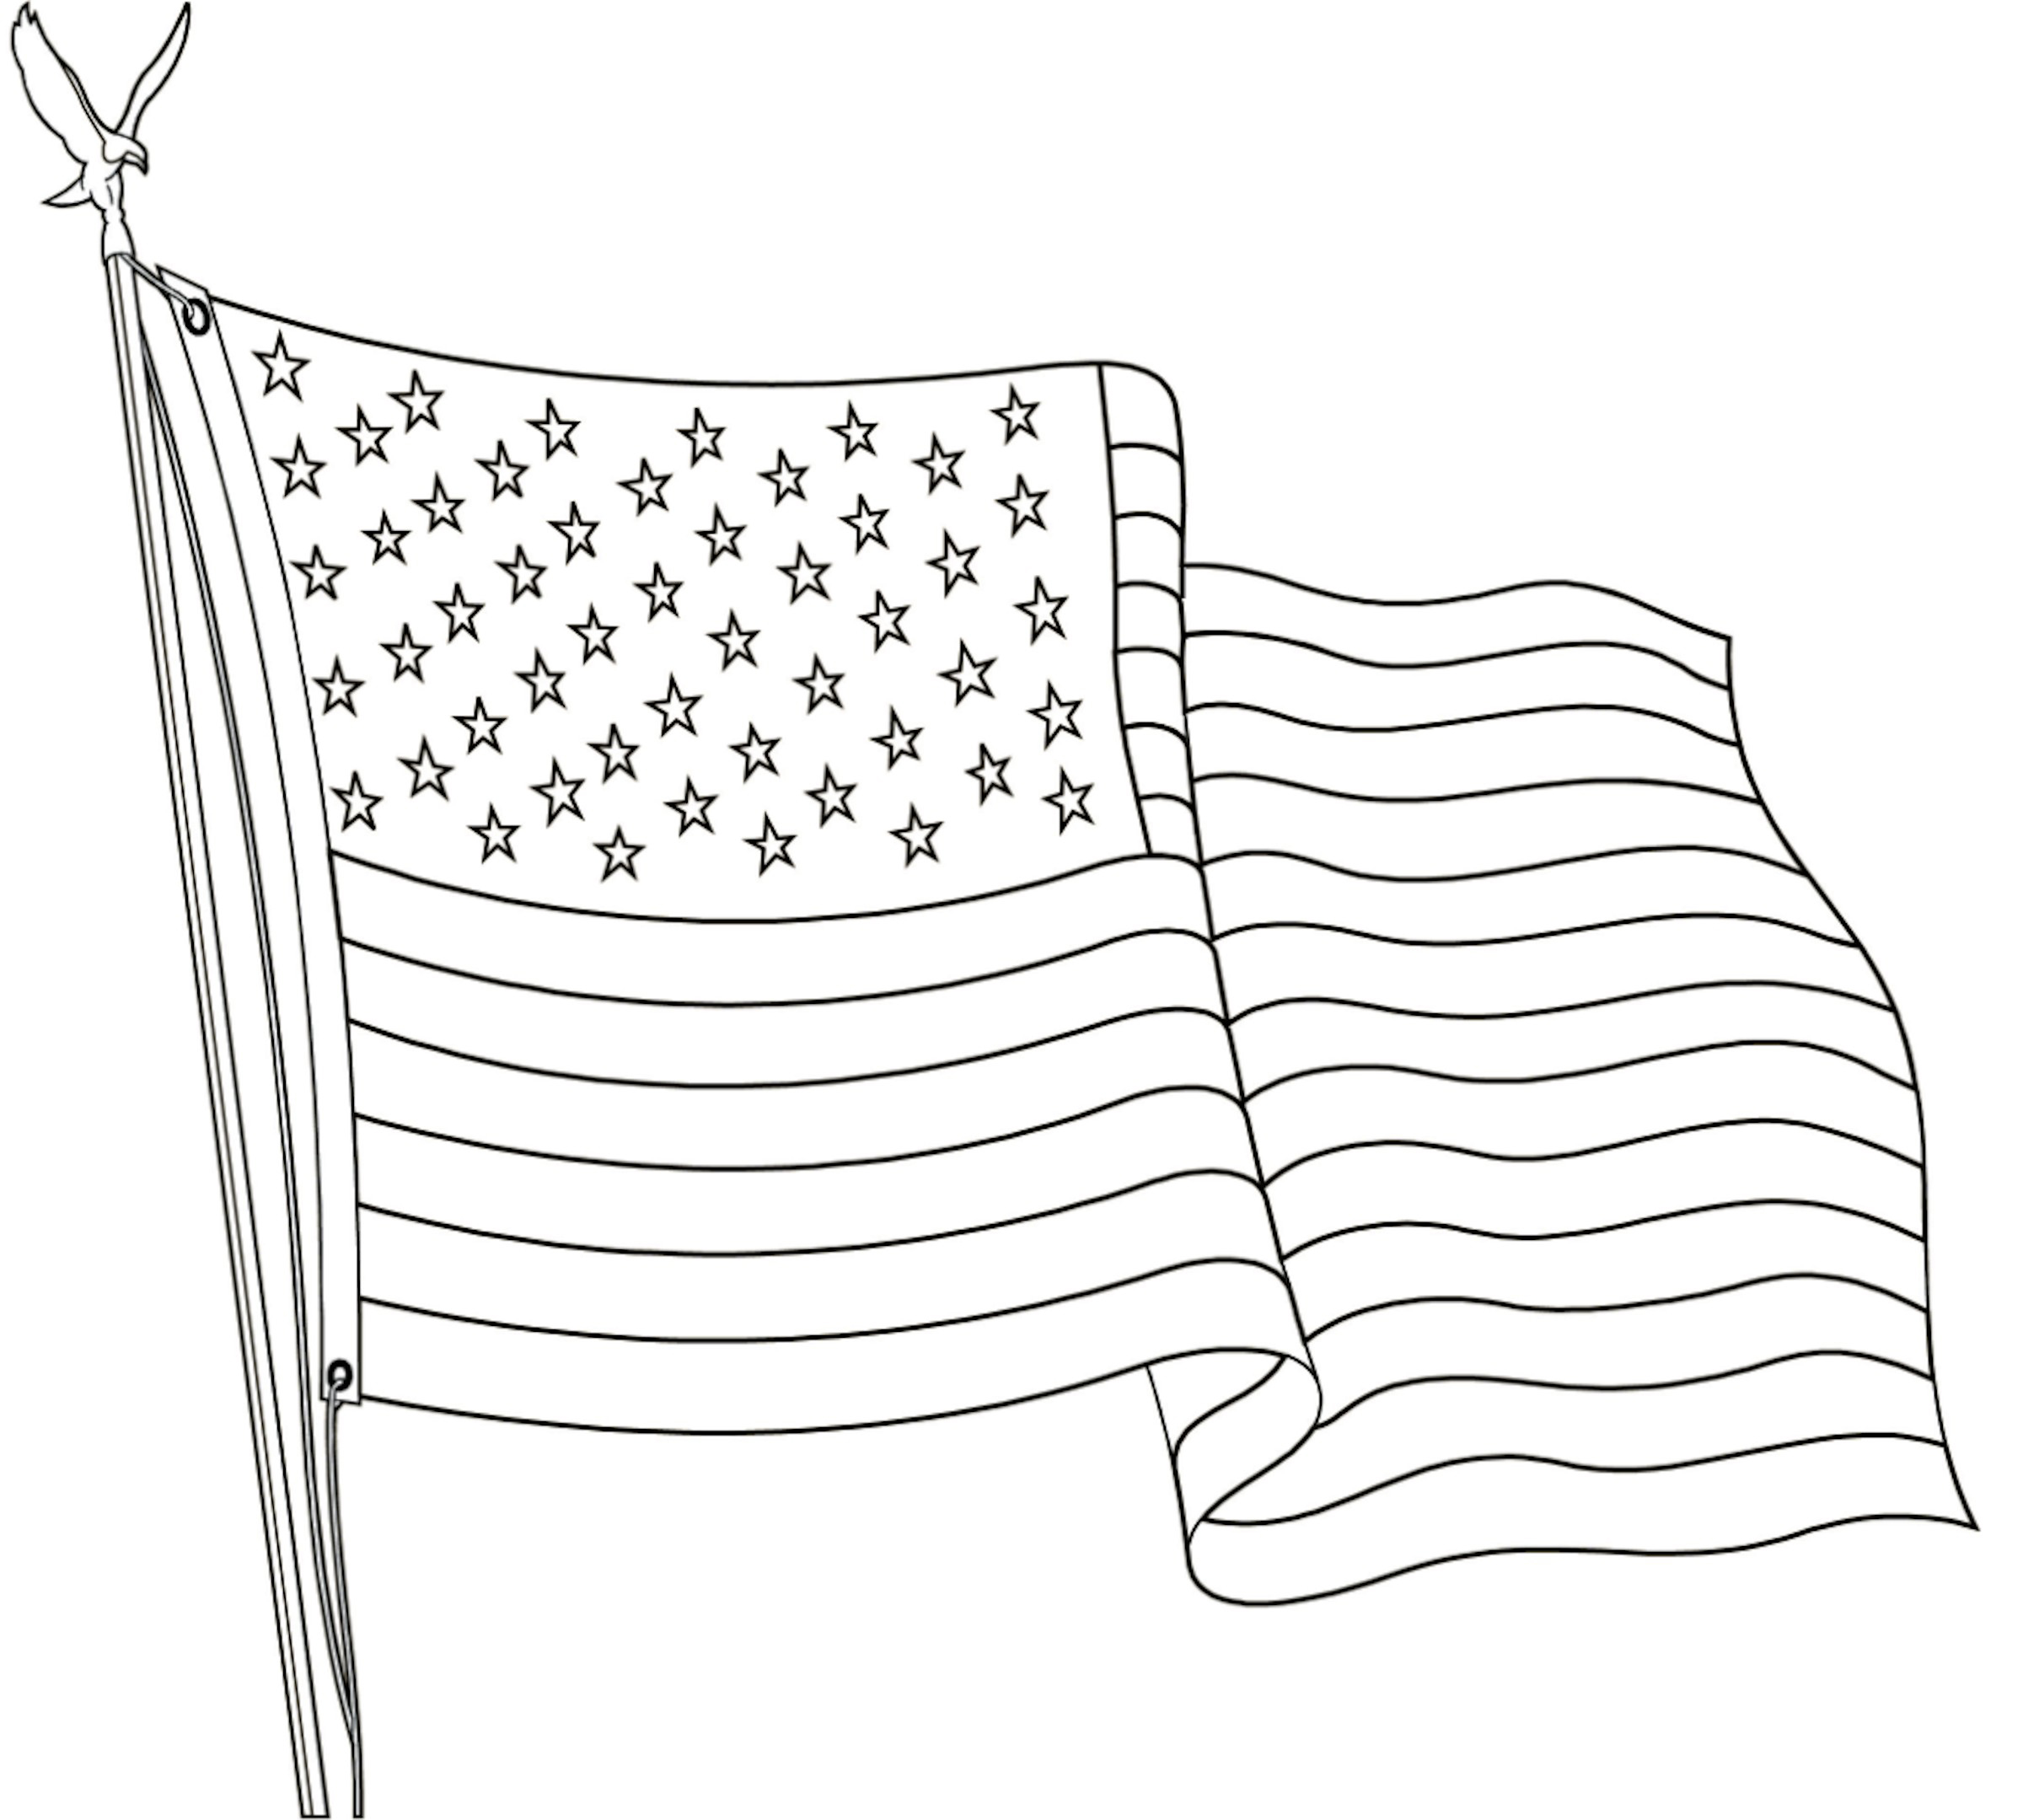 flag-day-coloring-pages-best-coloring-pages-for-kids